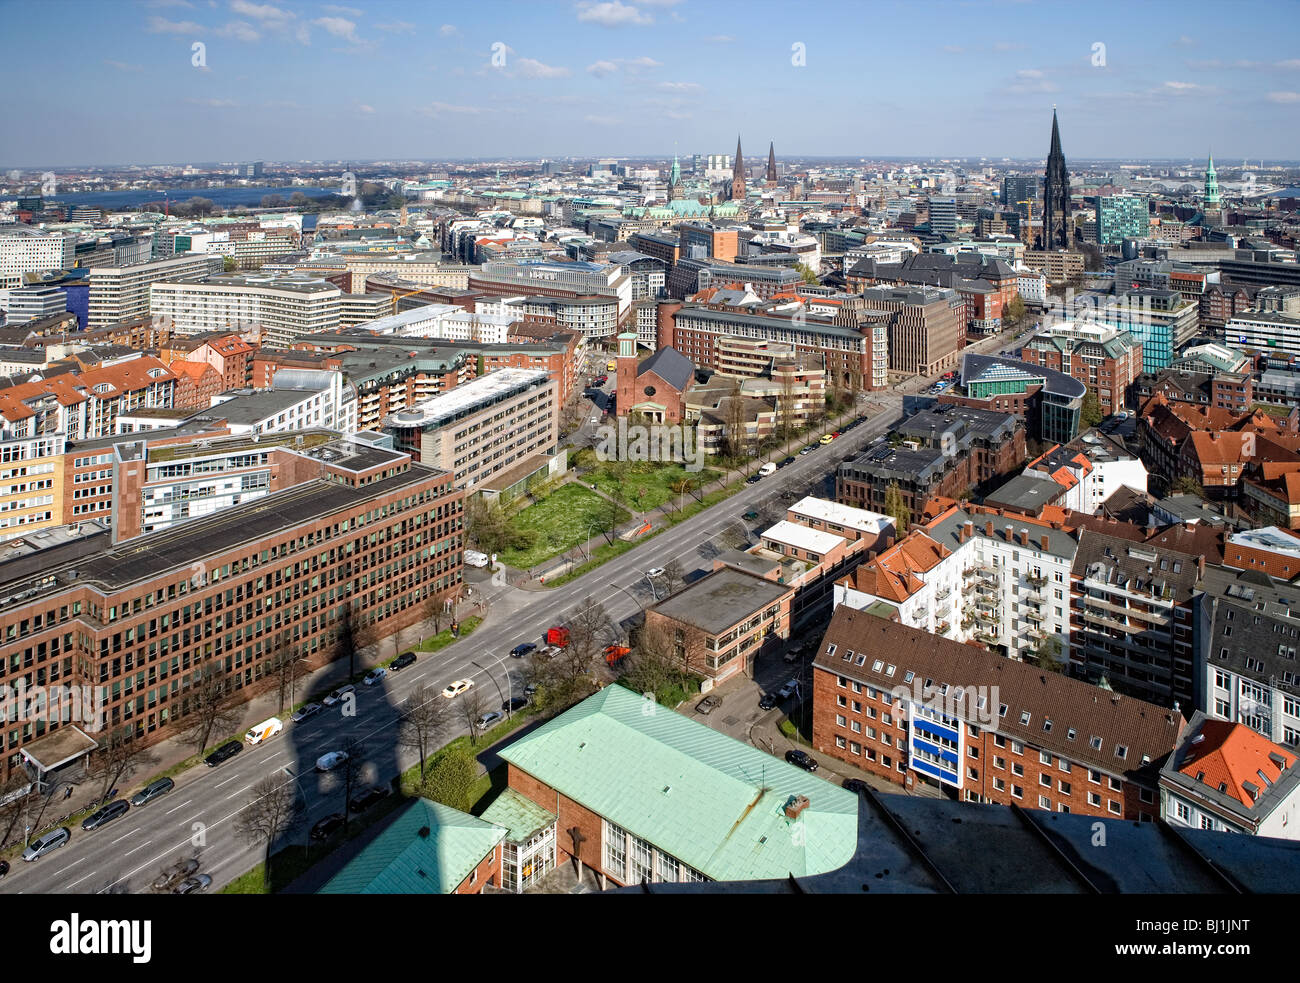 View from the Michel, St. Michaelis church on Hanseatic city of Hamburg, Germany, Europe Stock Photo